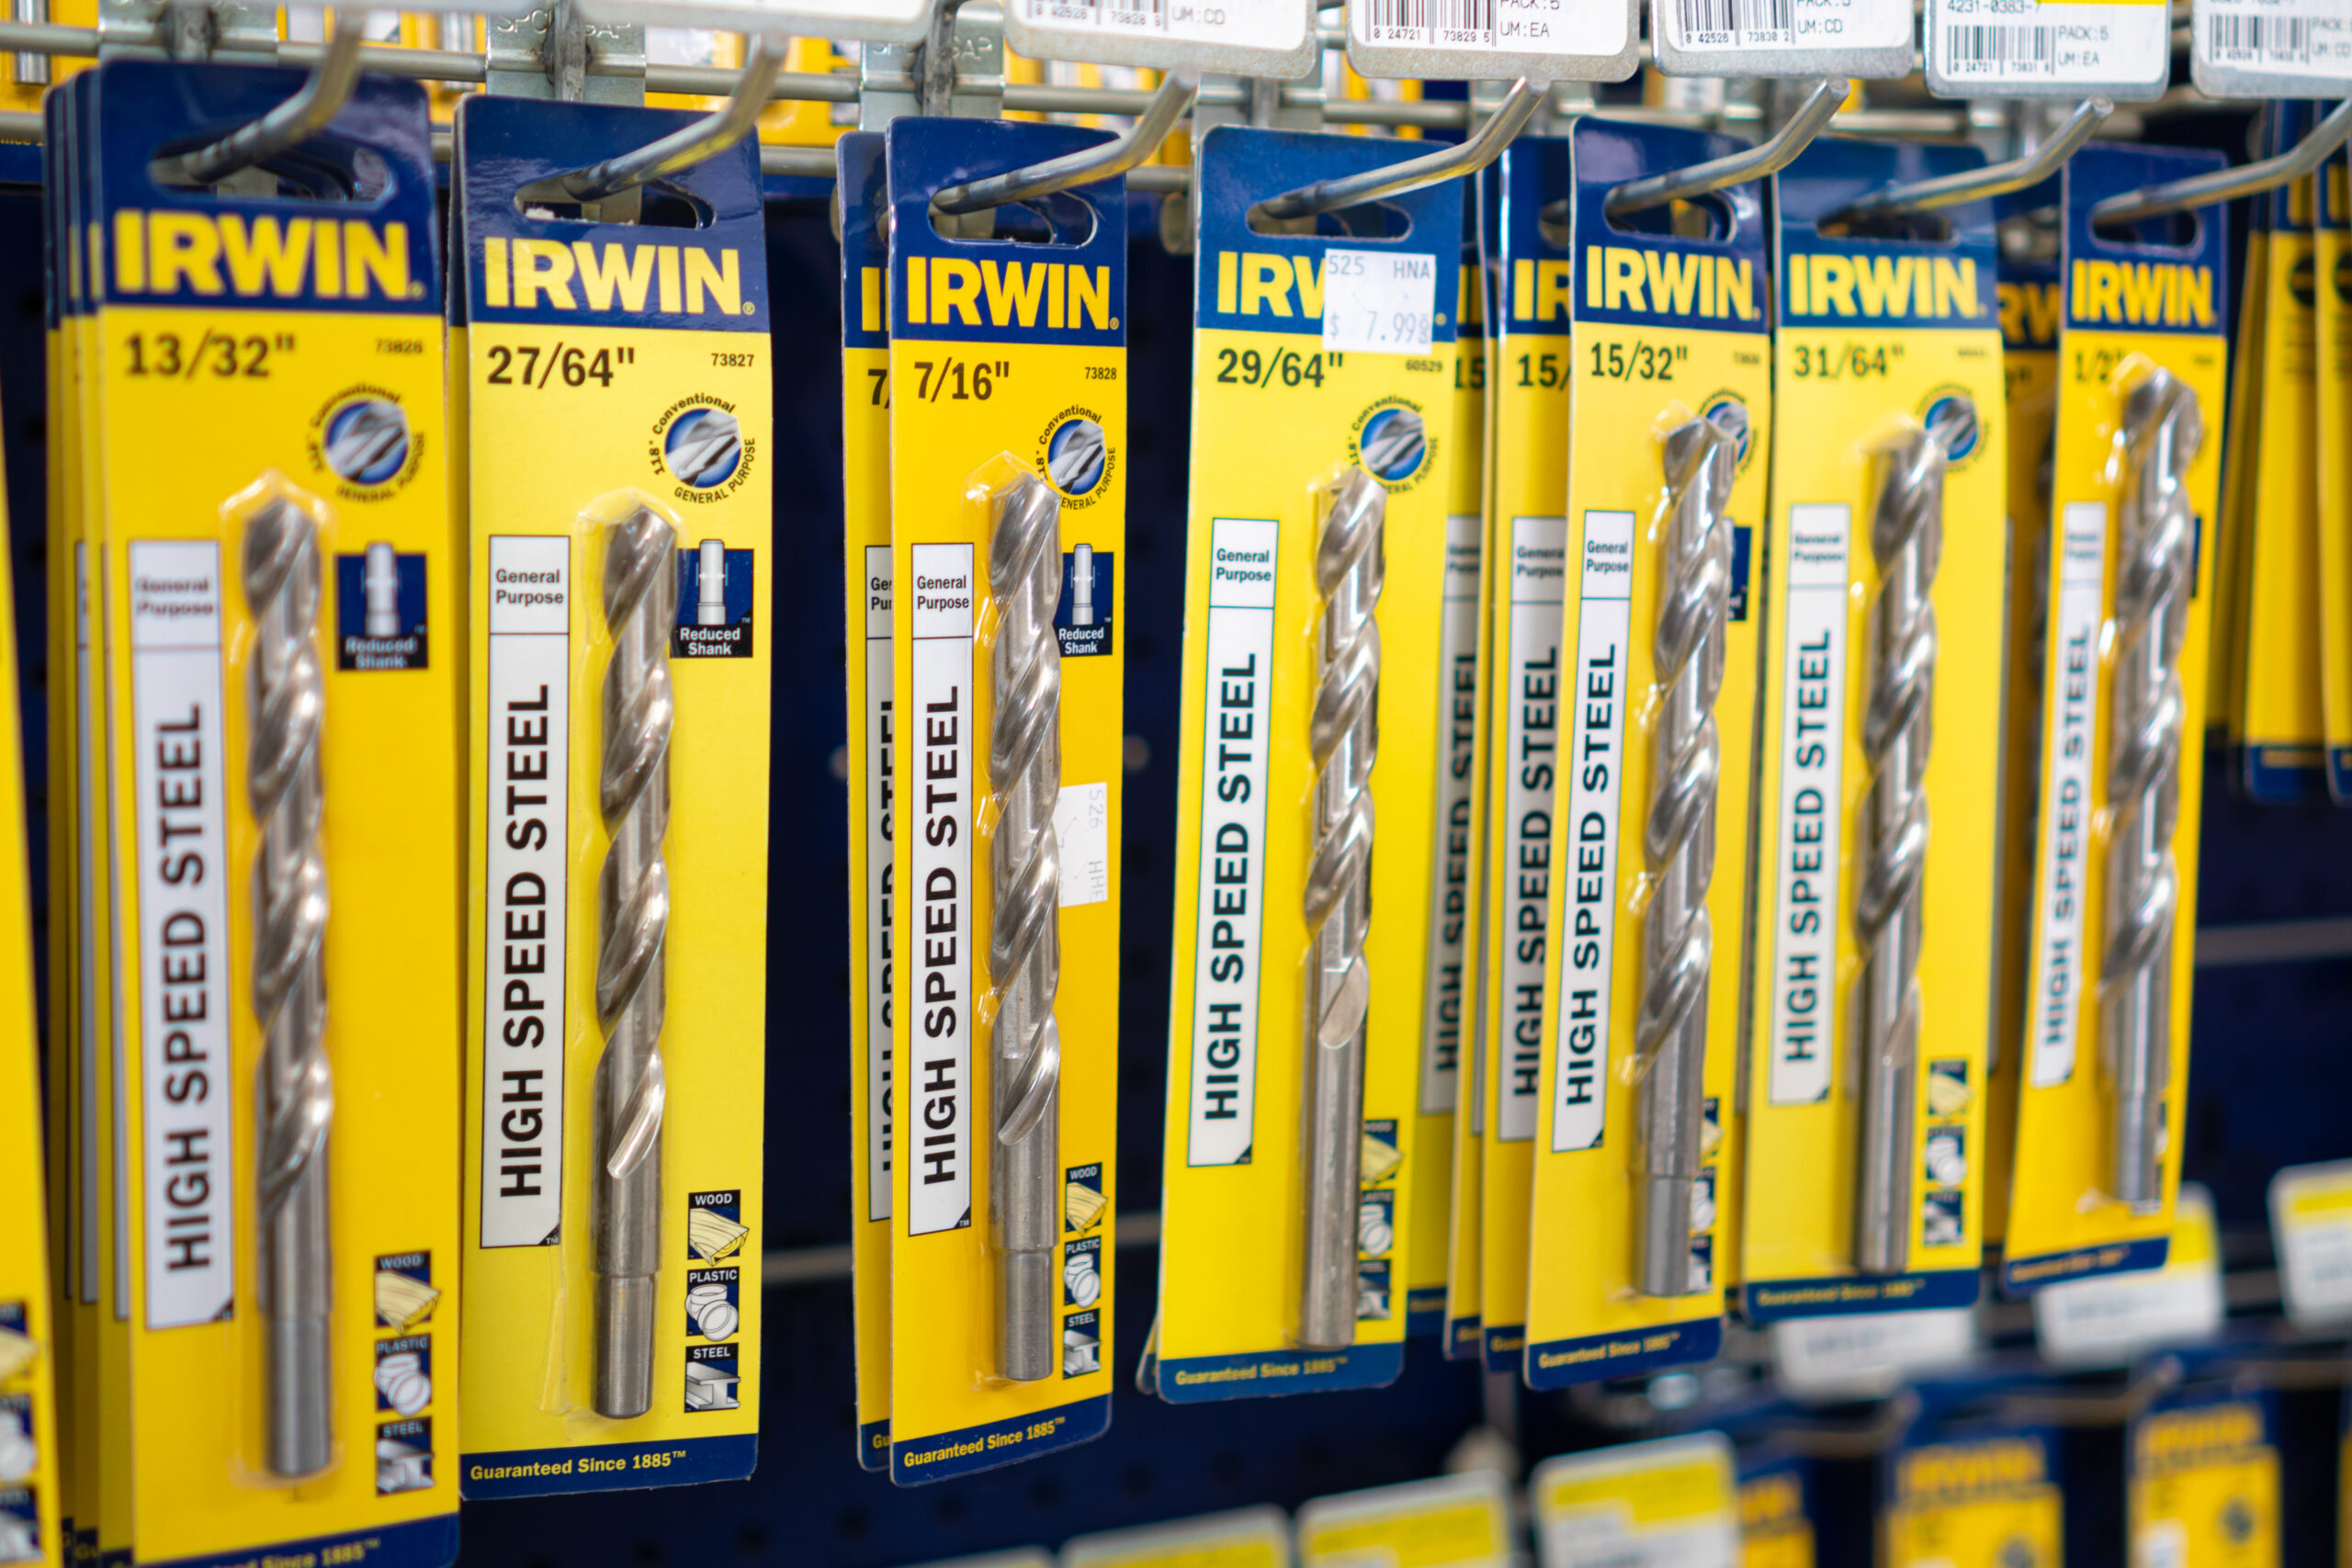 Drill Bits from the Irwin Brand